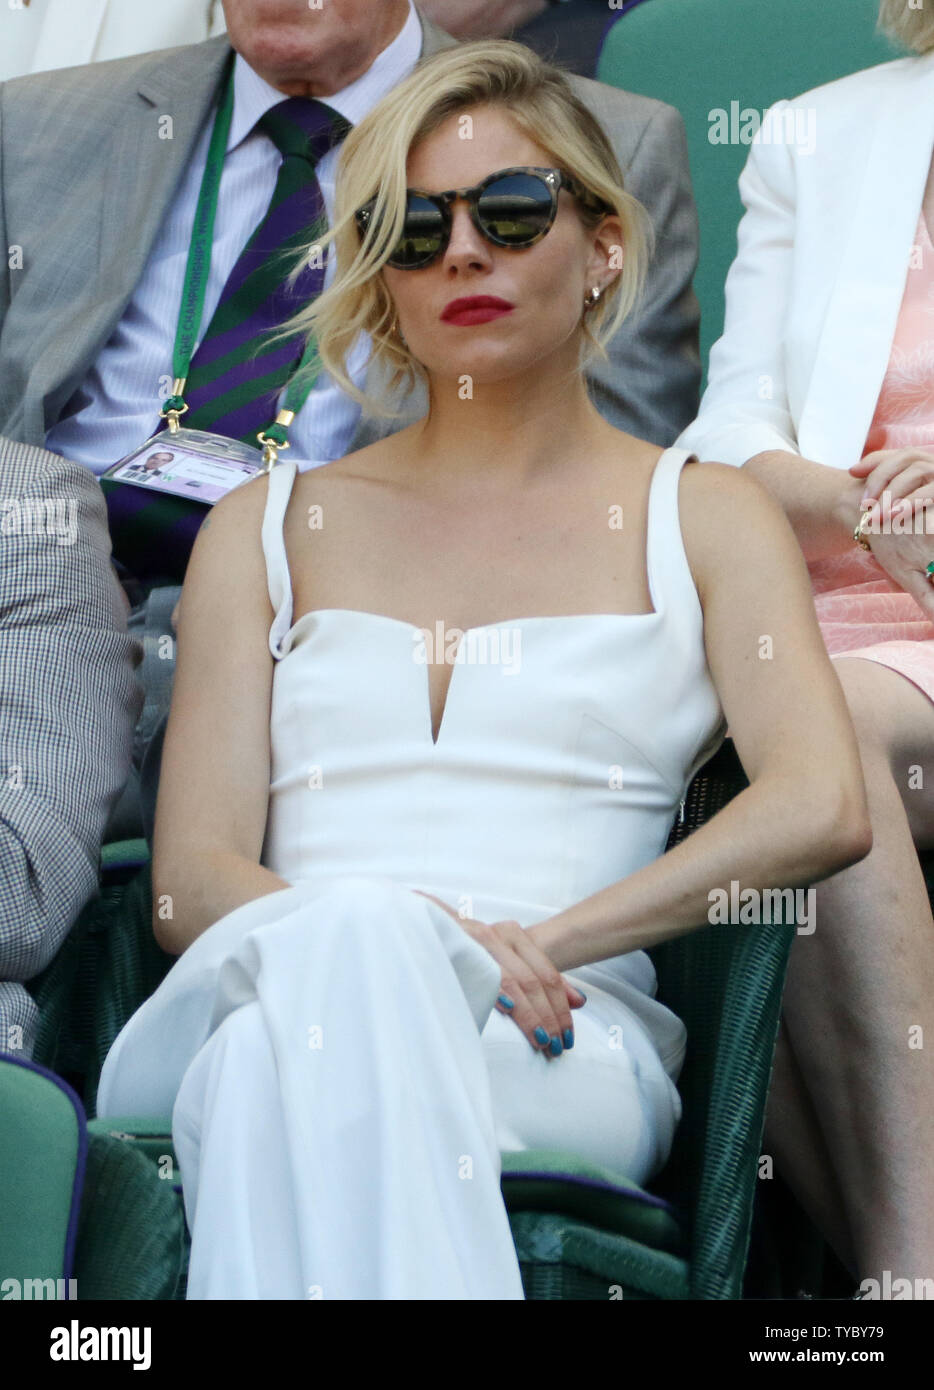 British actress Sienna Miller sits in the royal box during the Men's Semi-Final between Swiss Roger Federer and Great Britain's Andy Murray on day eleven of the 2015 Wimbledon championships, London on July 10, 2015.Federer won the match 7-5, 7-5, 6-4.      Photo by Hugo Philpott/UPI. Stock Photo